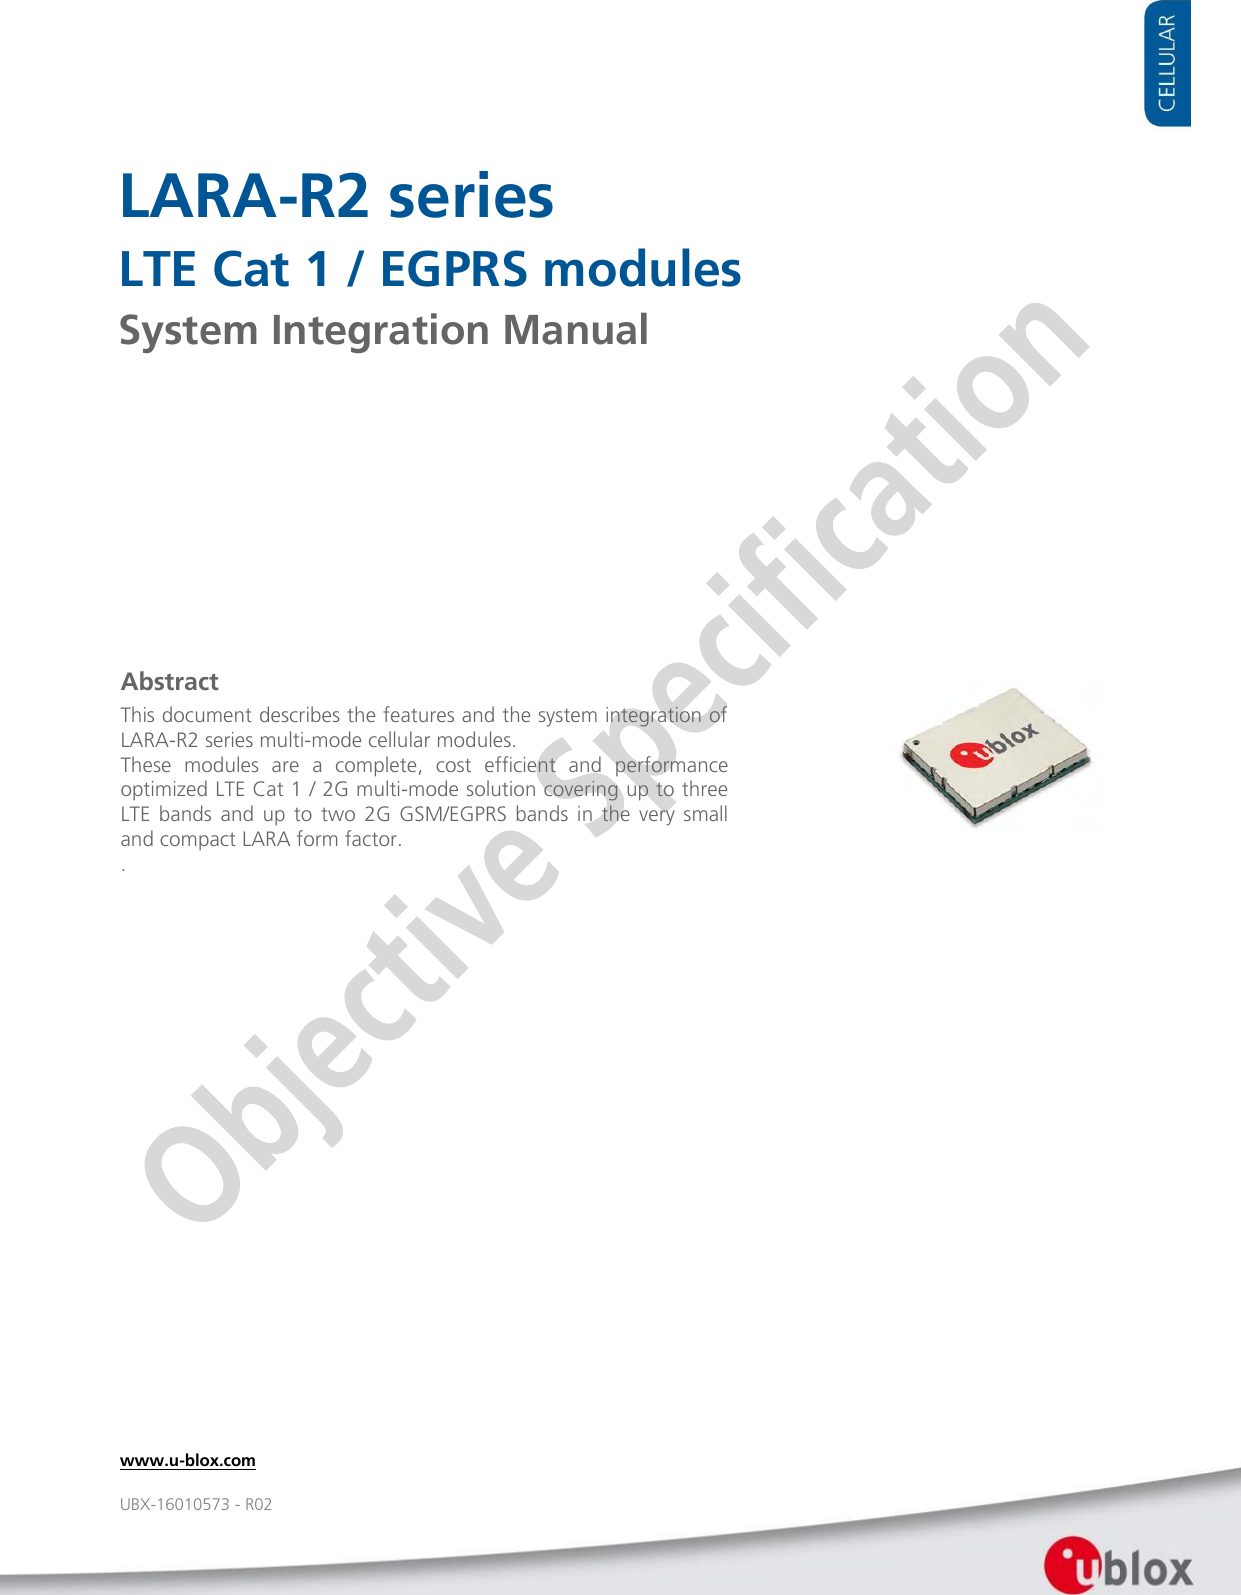     LARA-R2 series LTE Cat 1 / EGPRS modules System Integration Manual                   Abstract This document describes the features and the system integration of LARA-R2 series multi-mode cellular modules.  These  modules  are  a  complete,  cost  efficient  and  performance optimized LTE Cat 1 / 2G multi-mode solution covering up to three LTE  bands  and  up  to  two  2G  GSM/EGPRS bands  in  the  very  small and compact LARA form factor. .  www.u-blox.com UBX-16010573 - R02 